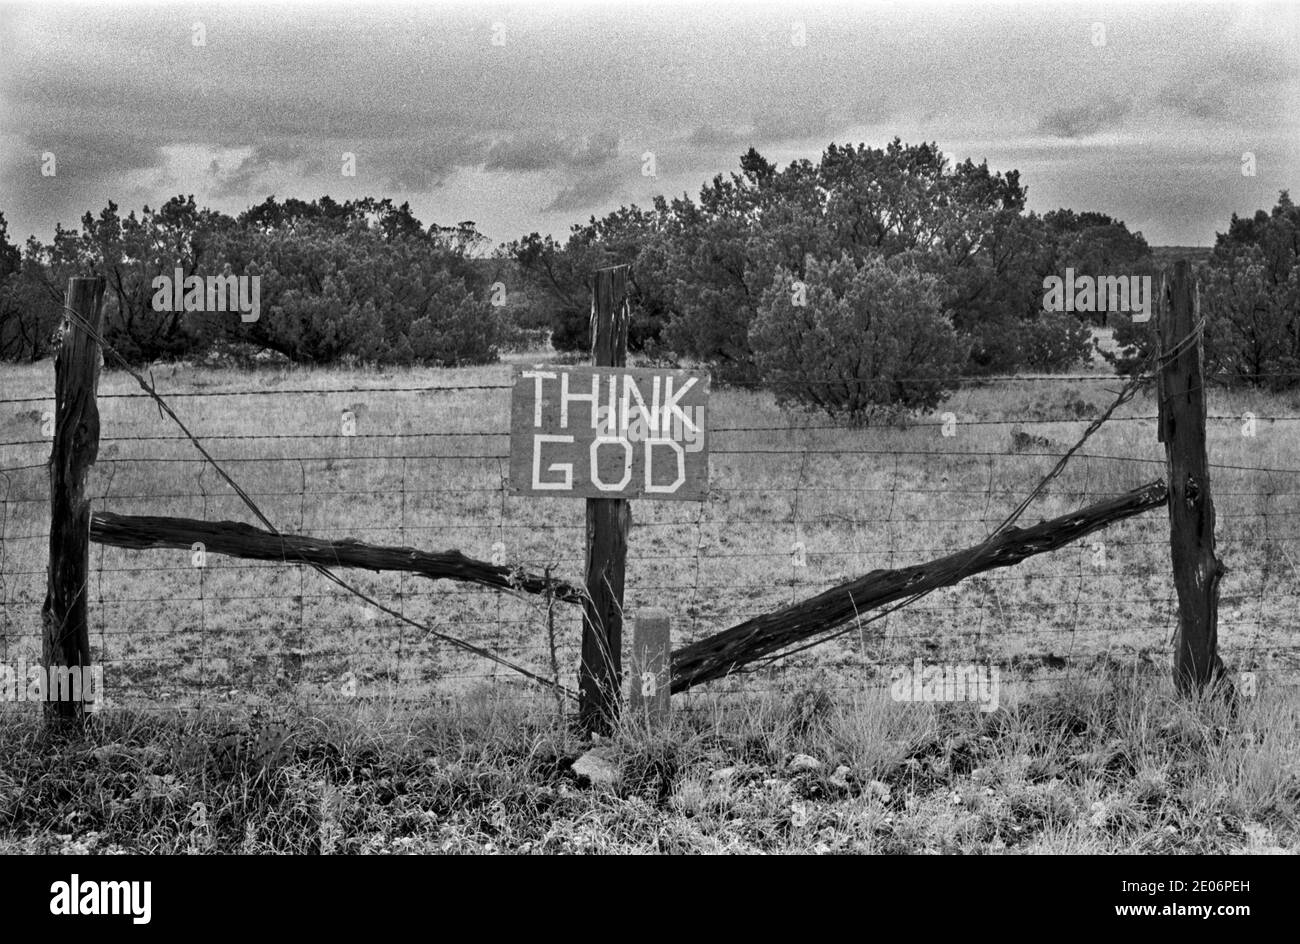 Think God, Born again Christian movement sign fixed to a fence enclosing barren land. Big Spring, Howard County, Texas USA 1999 1990s HOMER SYKES Stock Photo